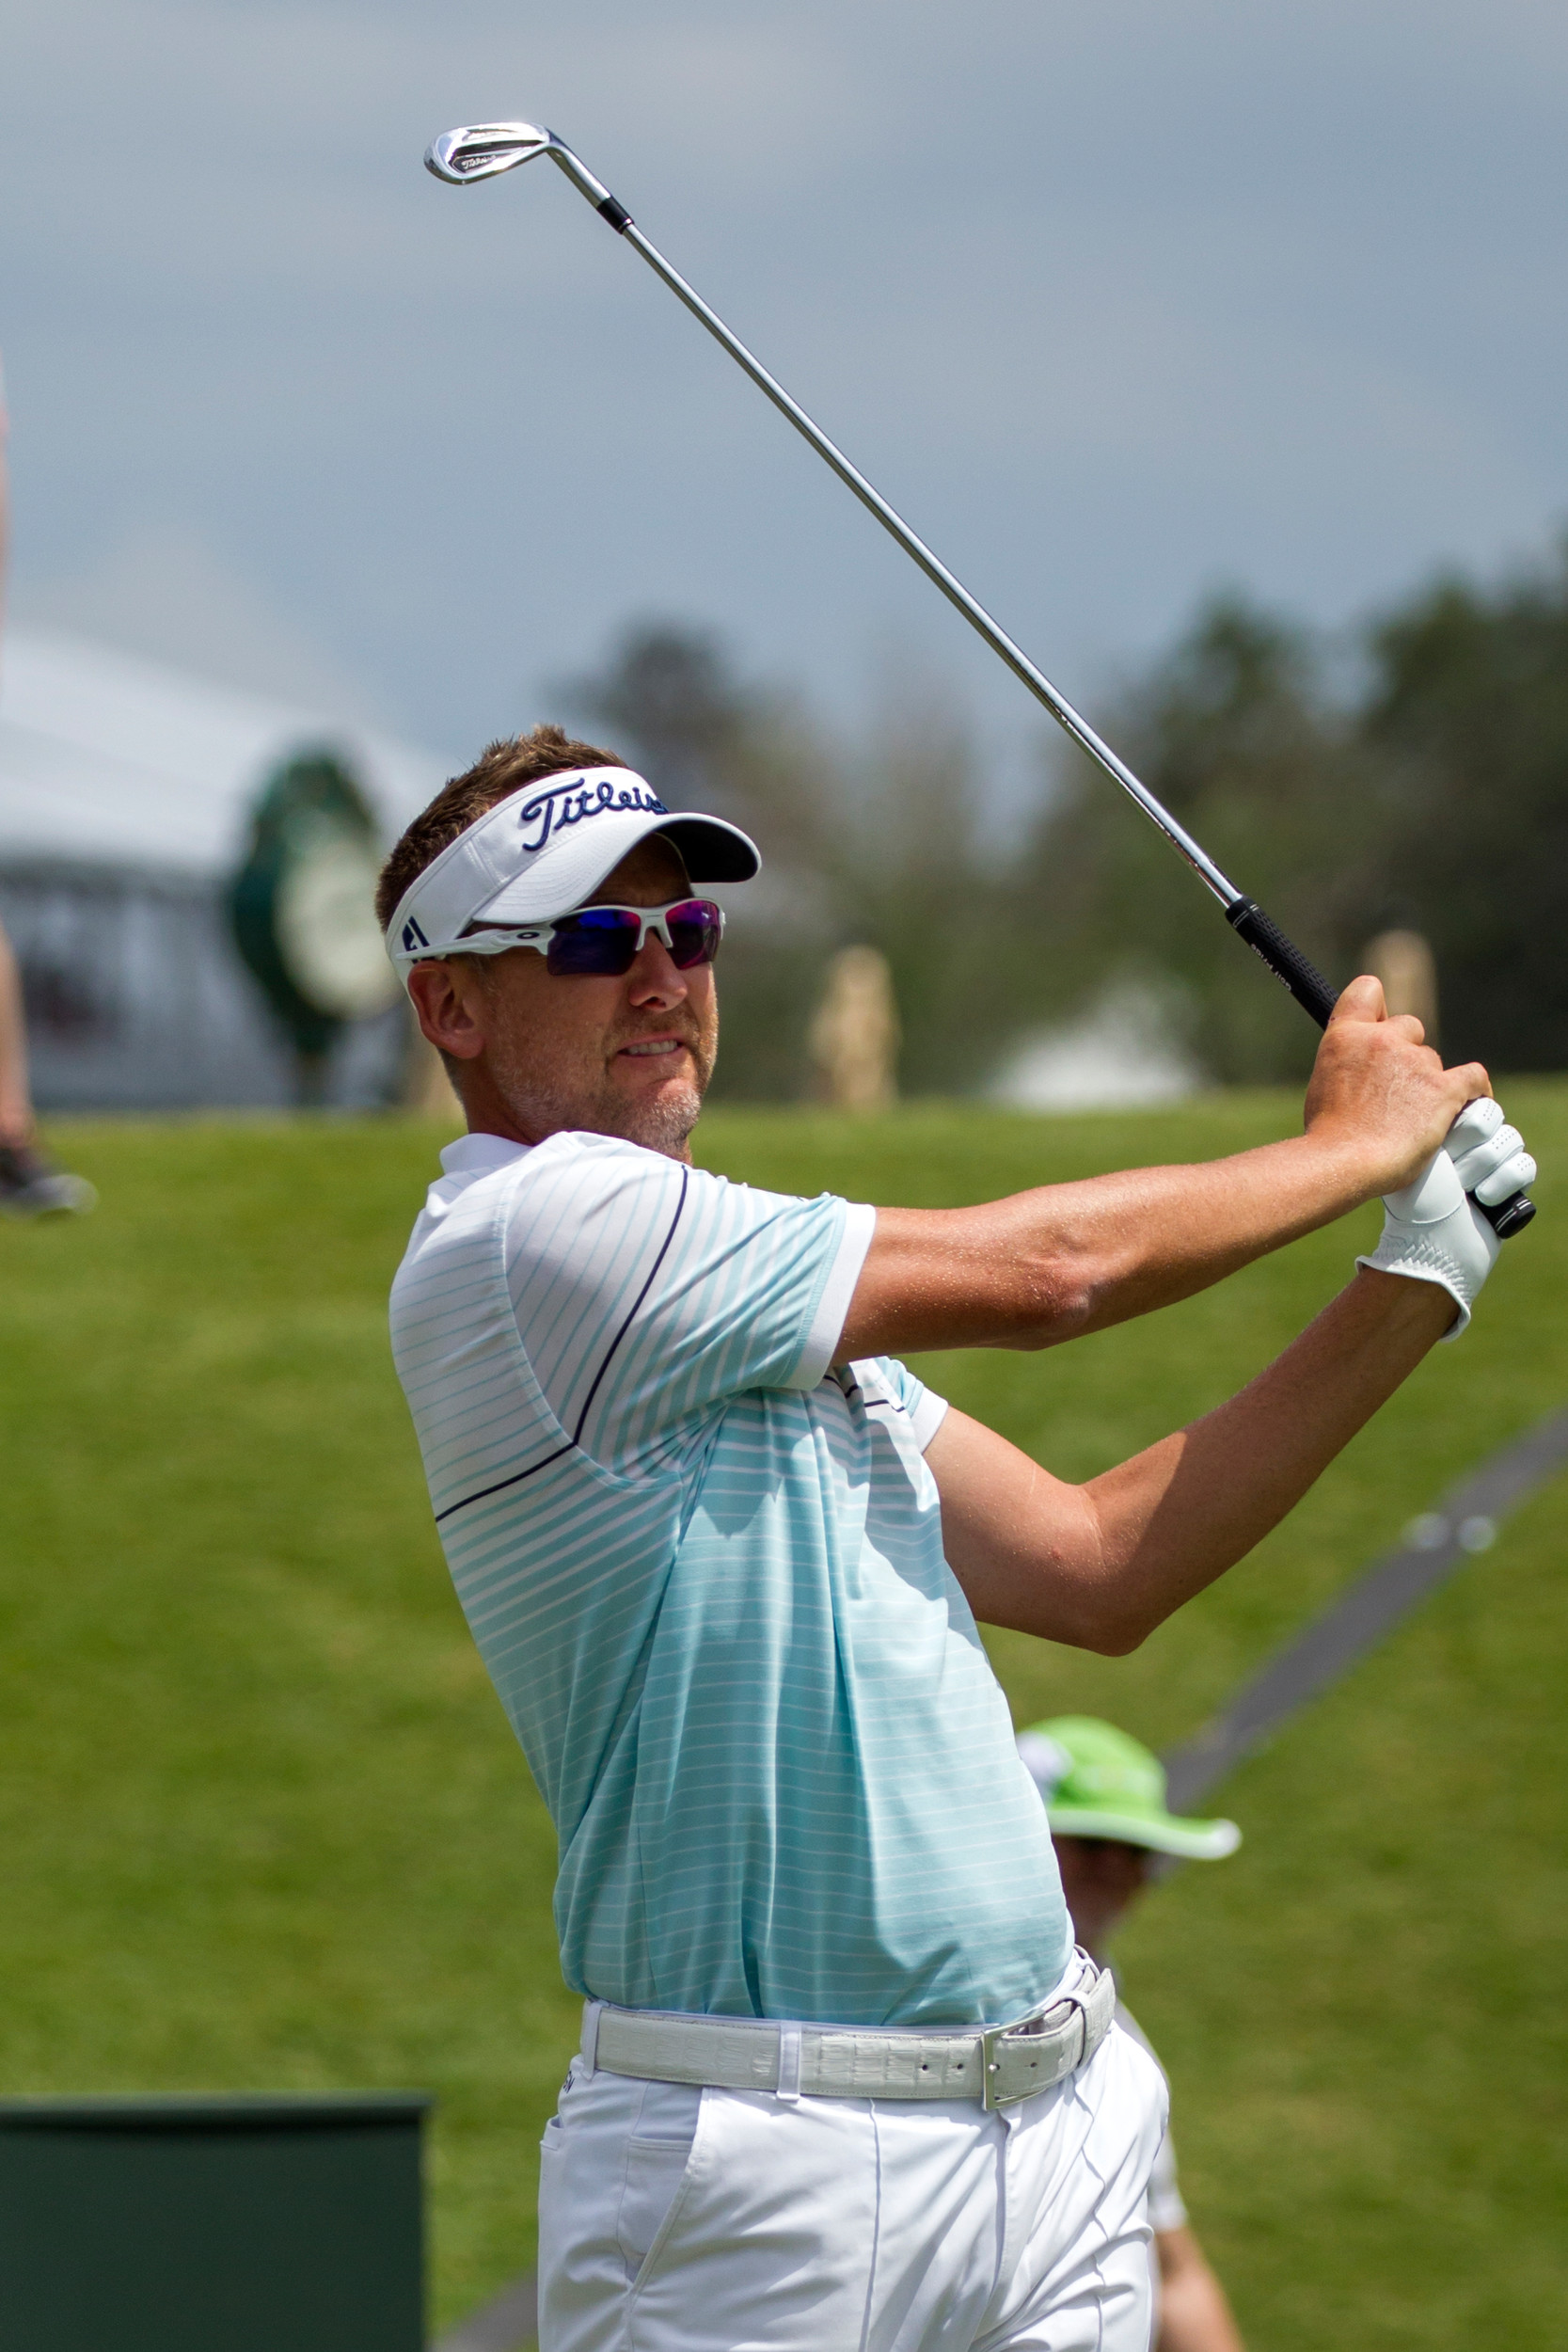 Ian Poulter of England, who tied for second with Oosthuizen, watches on as his shot sails down the fairway.